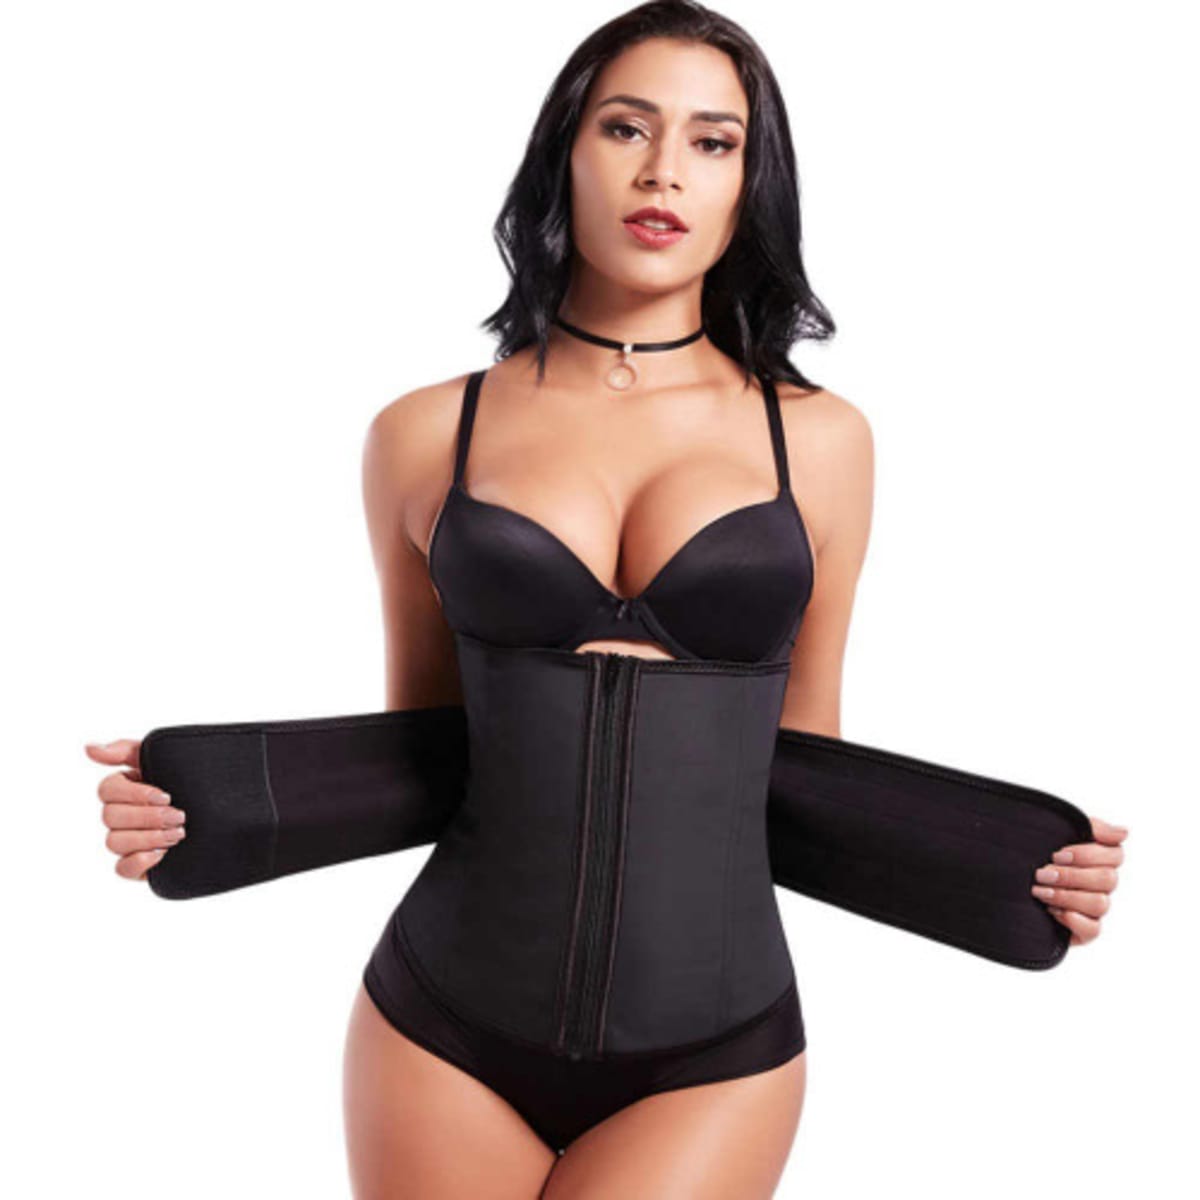  Waist Trainer For Women Lower Belly Fat, Stomach Wraps